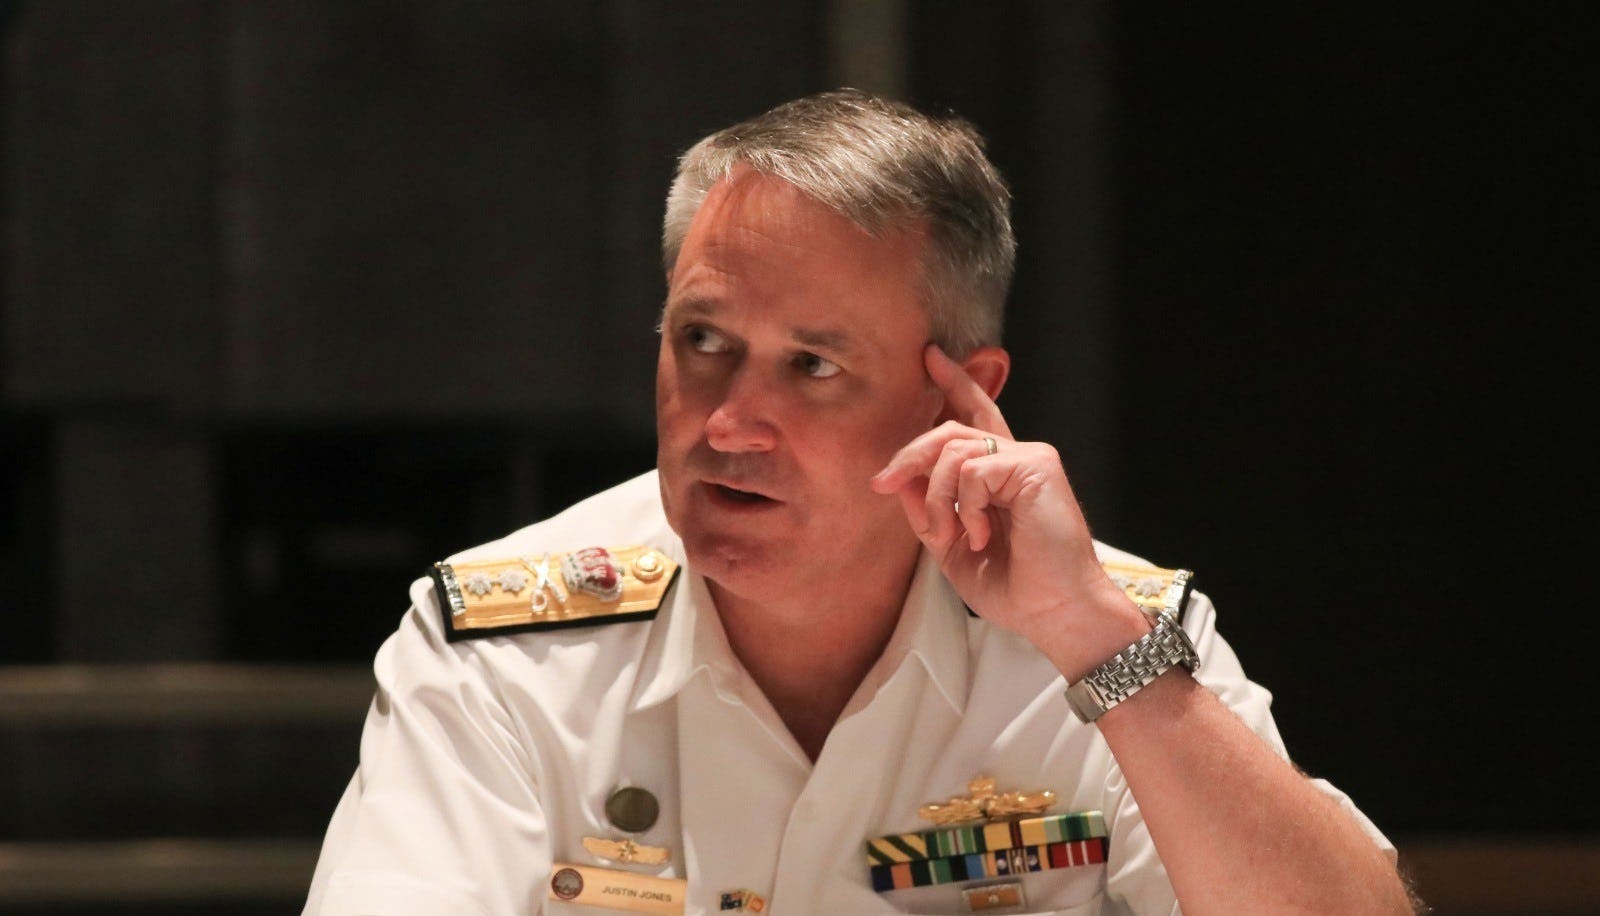 People Smuggling in the Indian Ocean: ‘To the smugglers, we will find you and arrest you’ -- Rear Admiral Justin Jones